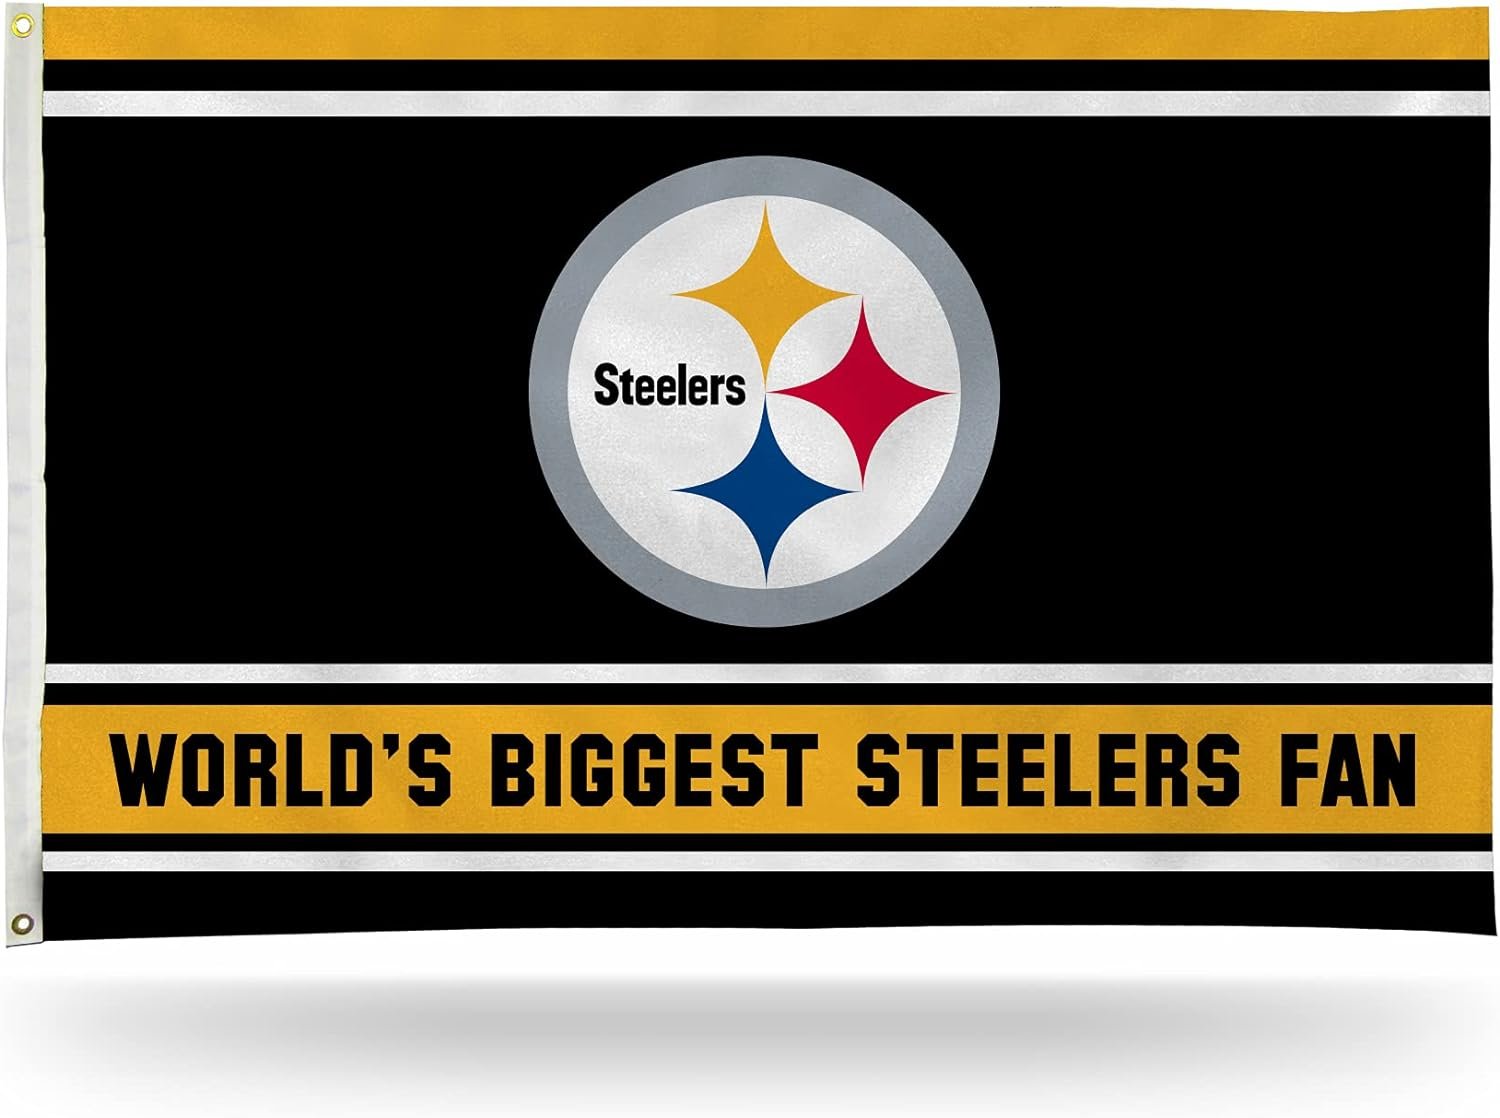 Pittsburgh Steelers 3x5 Feet Flag Banner, World's Biggest Fan, Metal Grommets, Single Sided, Indoor or Outdoor Use